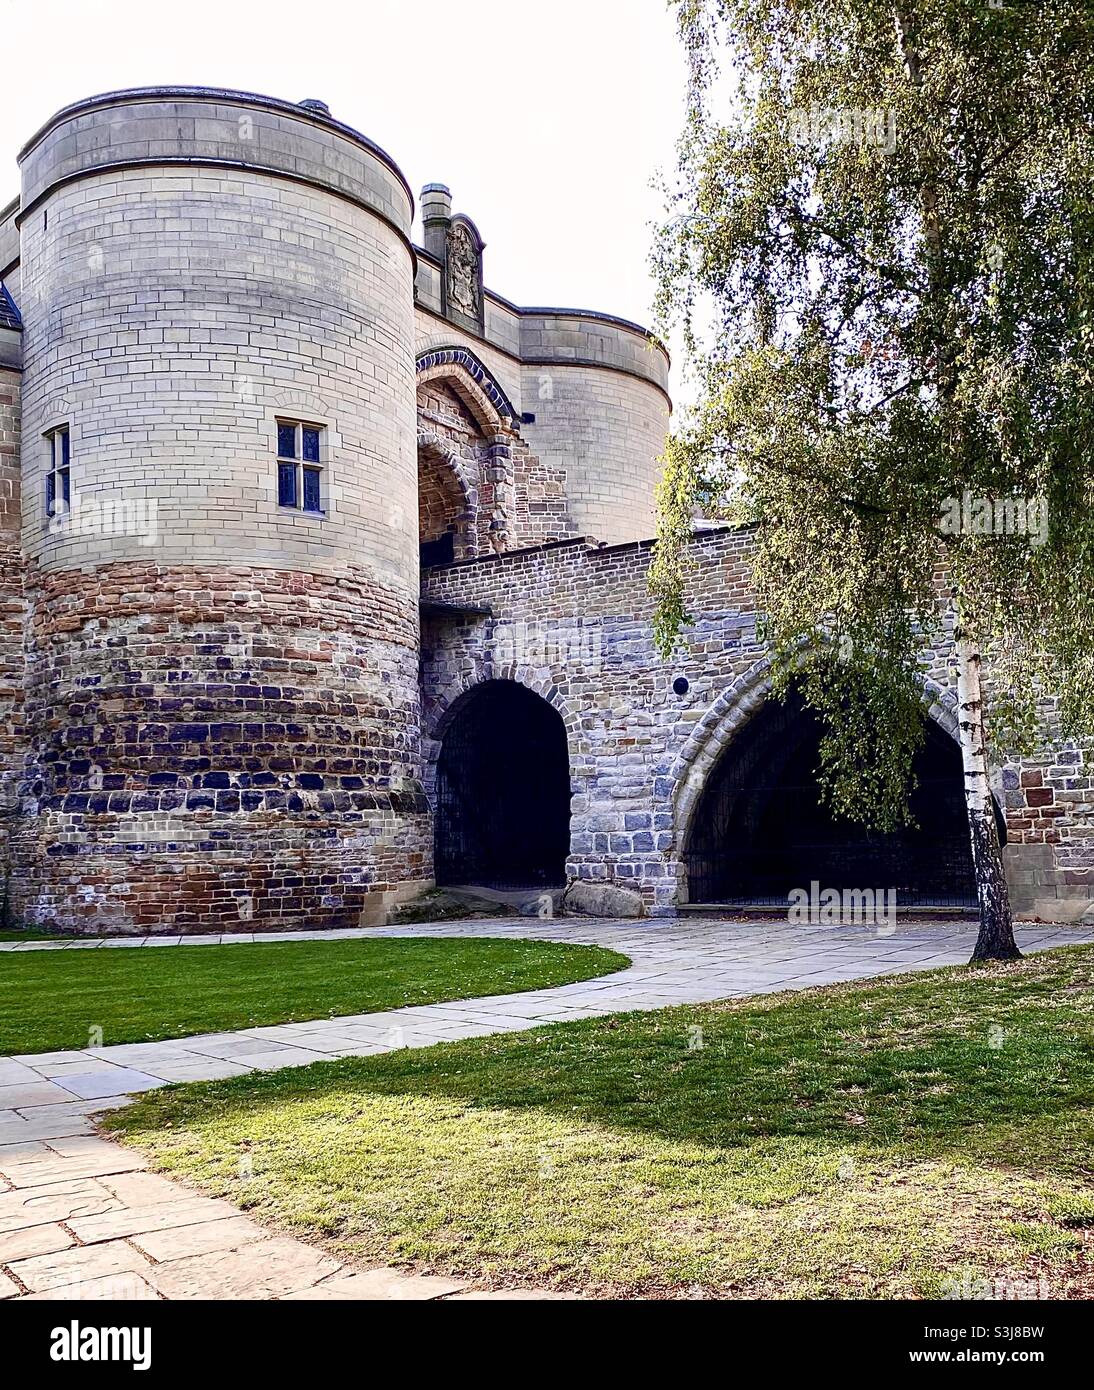 The Gatehouse at Nottingham Castle, UK, taken from near RobinHood’s statue. The original castle of 1068was demolished in the 1650s, being replaced by a Georgian mansion, recently refurbished (£30m). Stock Photo